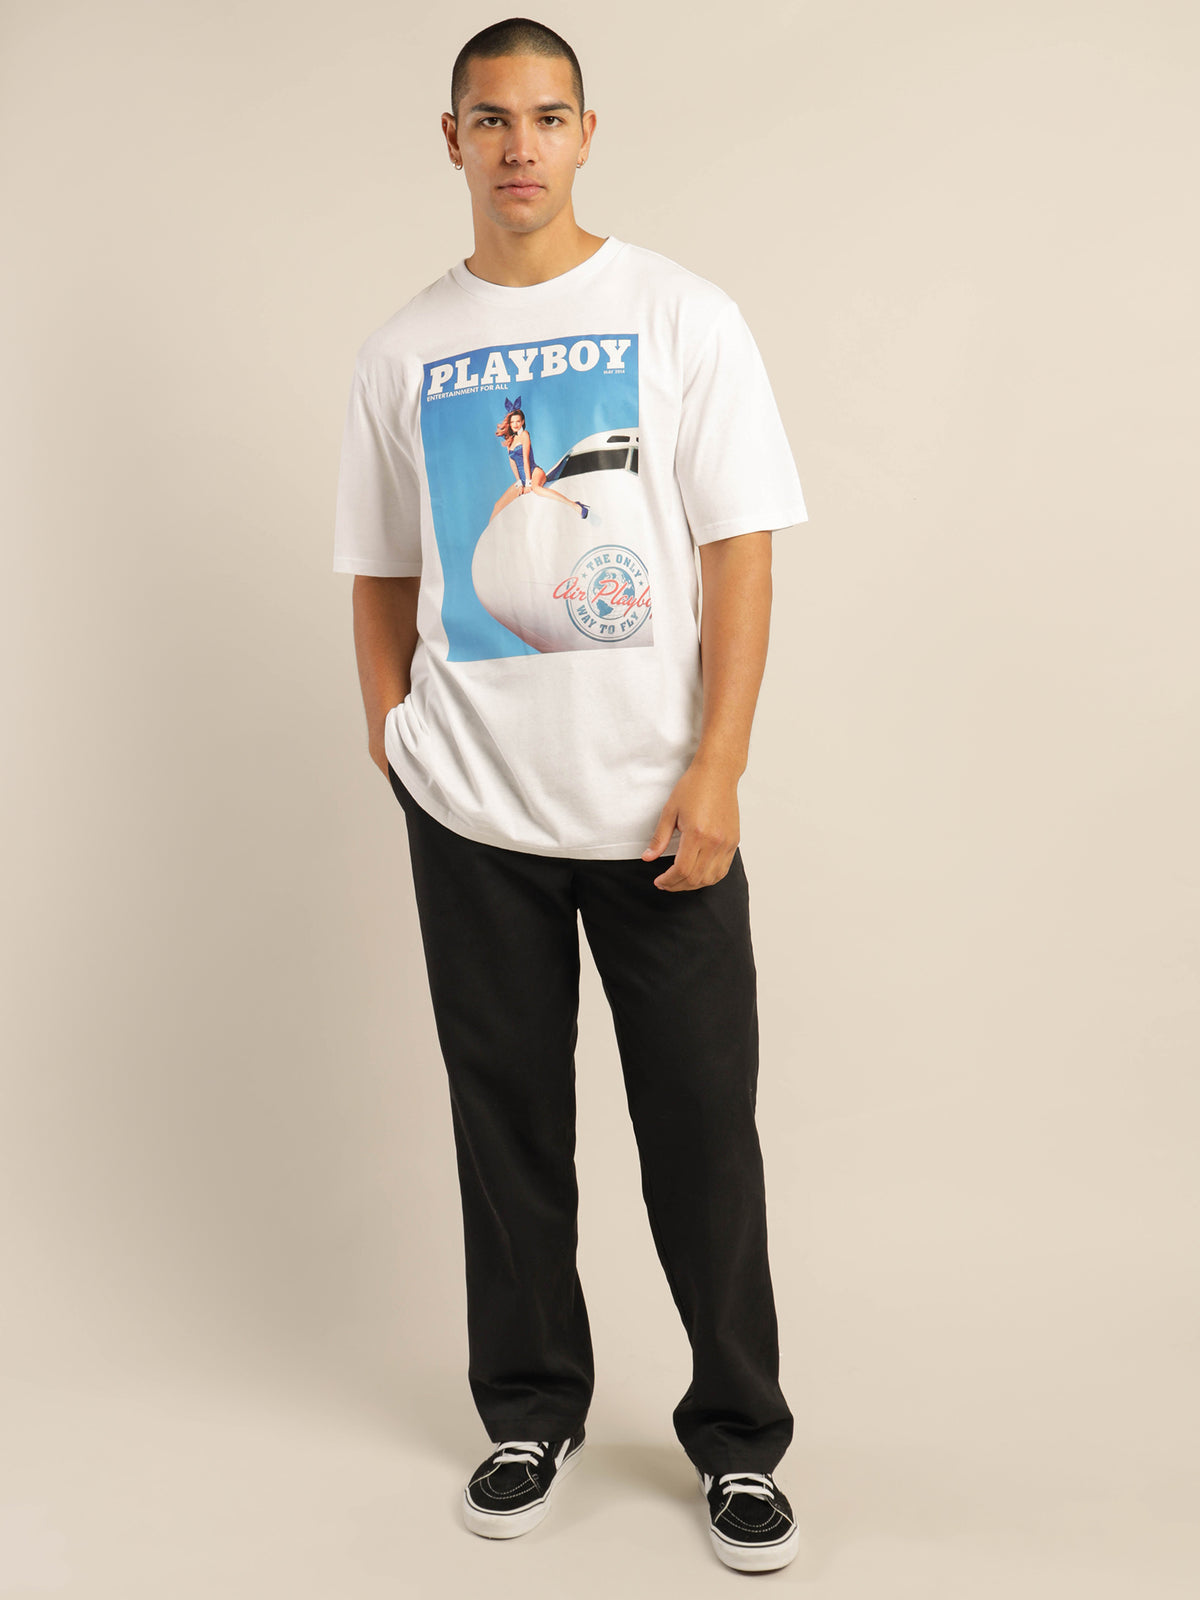 May 2014&#39; T-Shirt in White